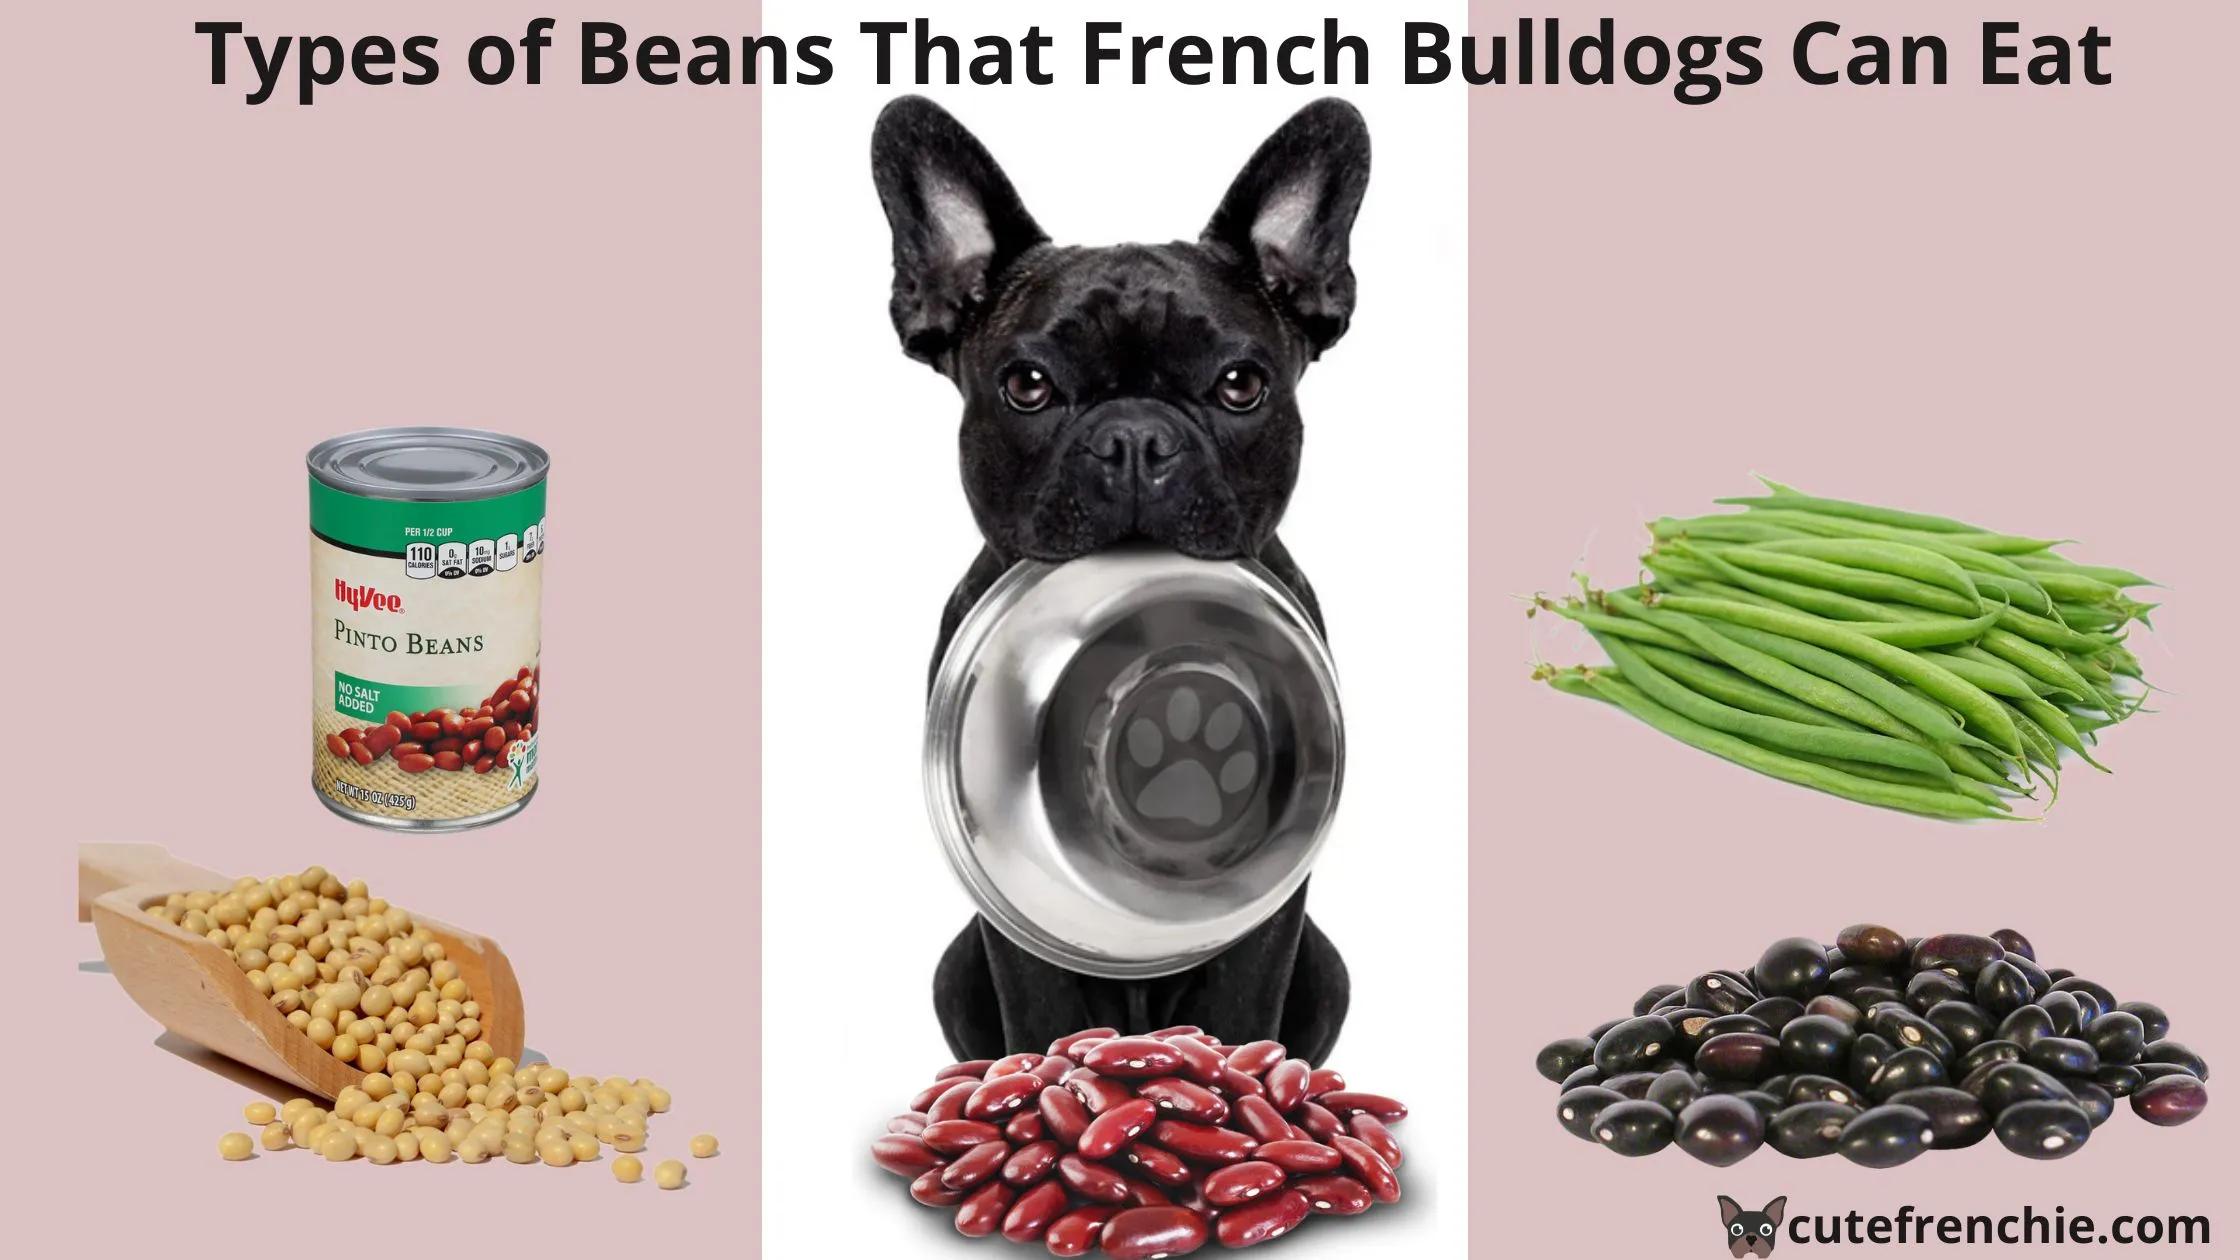 French Bulldogs and bowl and all types of Beans